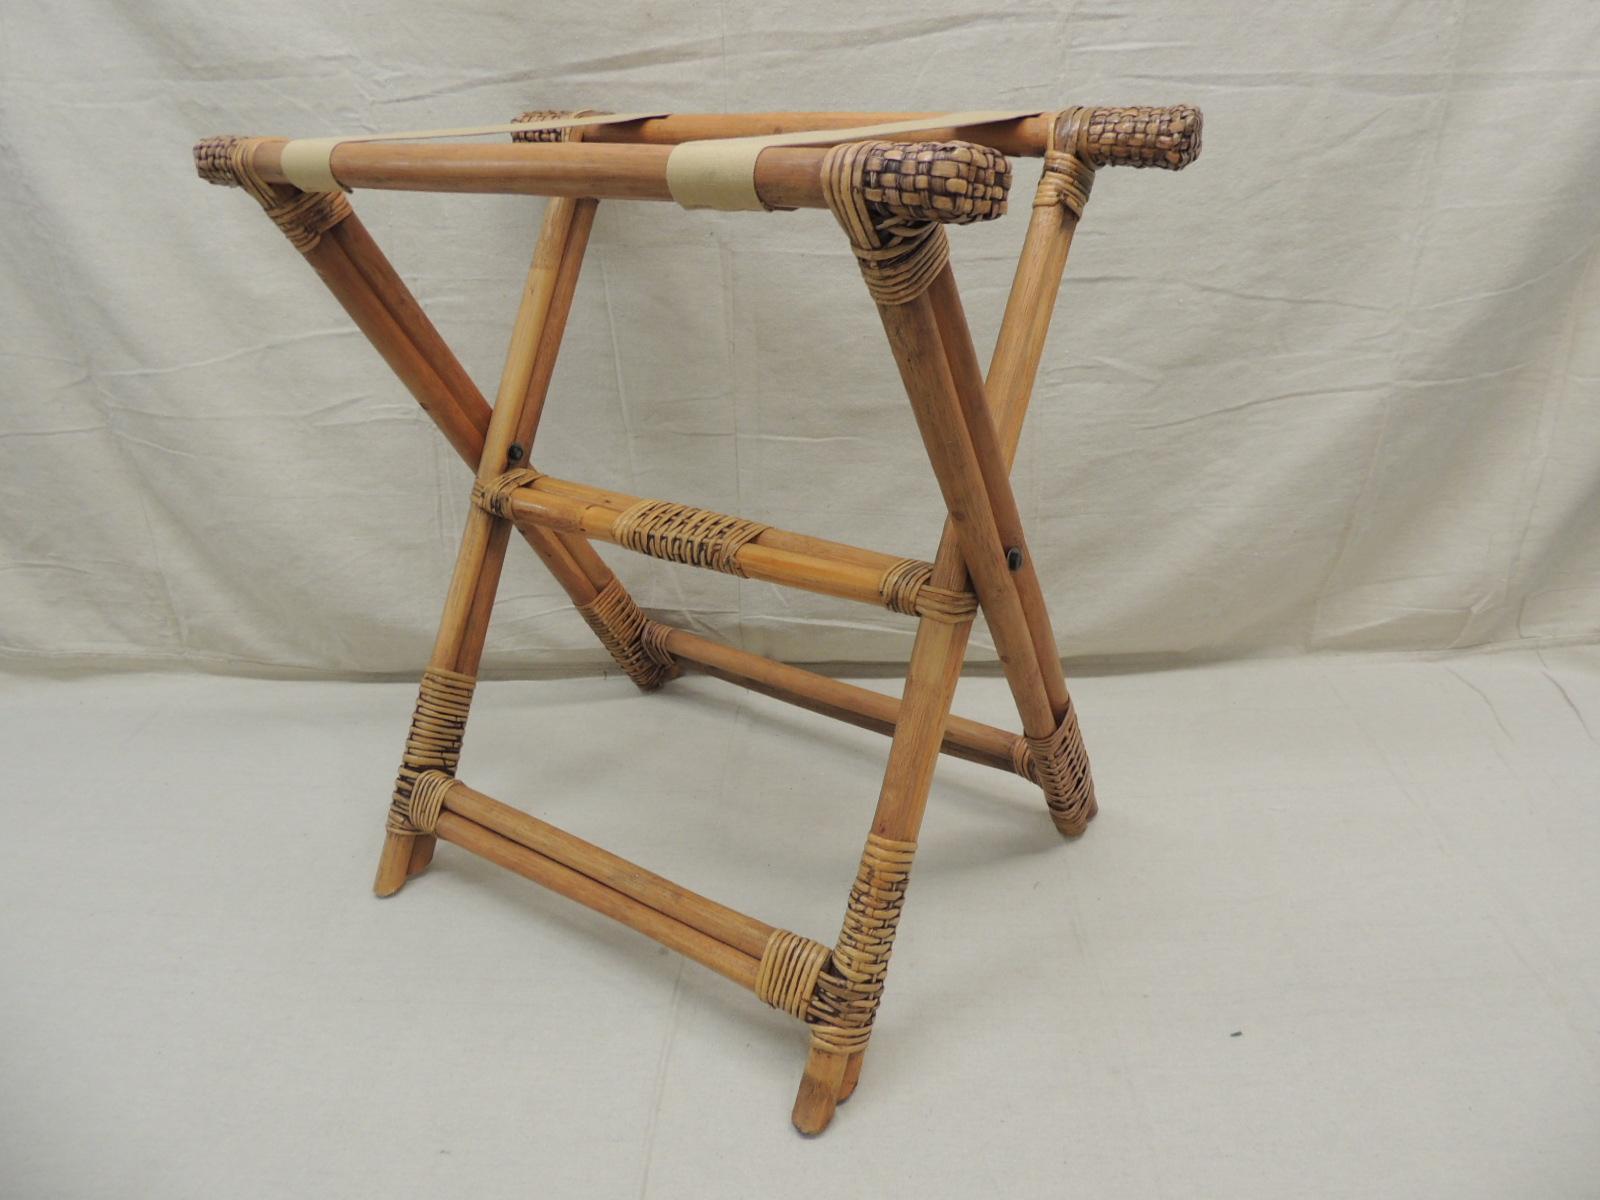 Bamboo and rattan woven folding luggage stand.
Size: 13